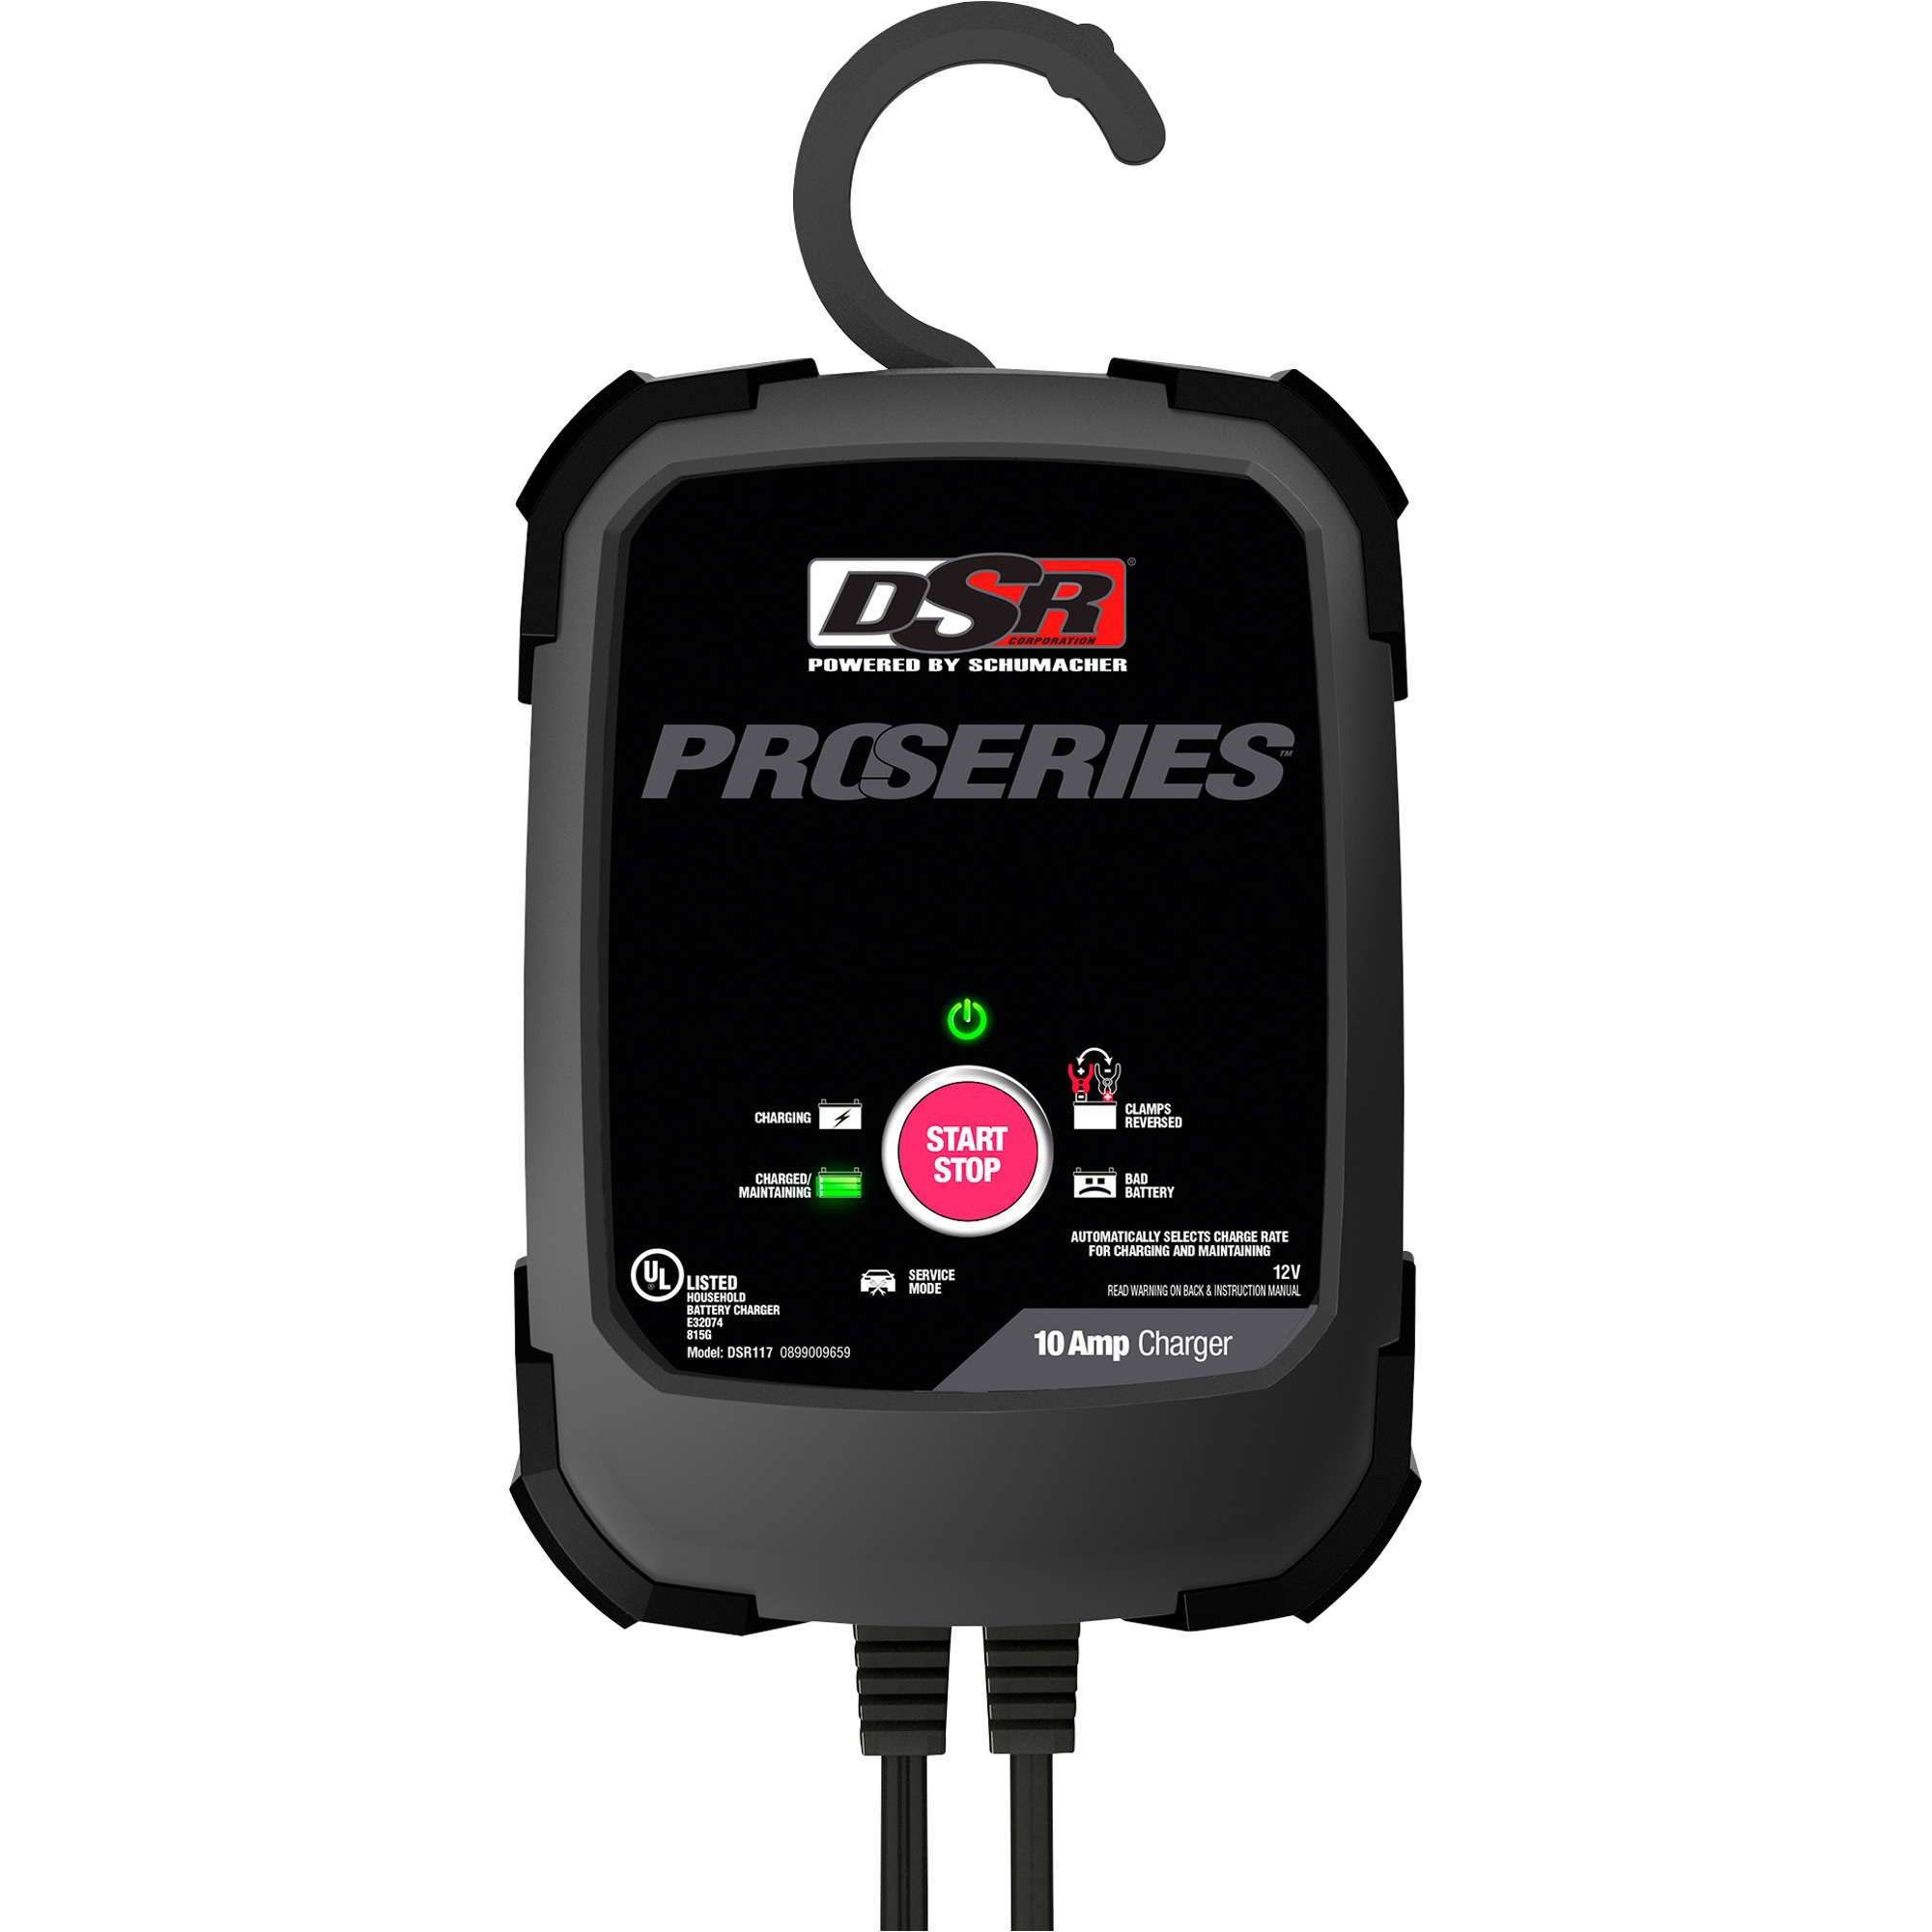 Schumacher Battery Charger with Service Mode â 12 Volt, 10 Amp, Model DSR117